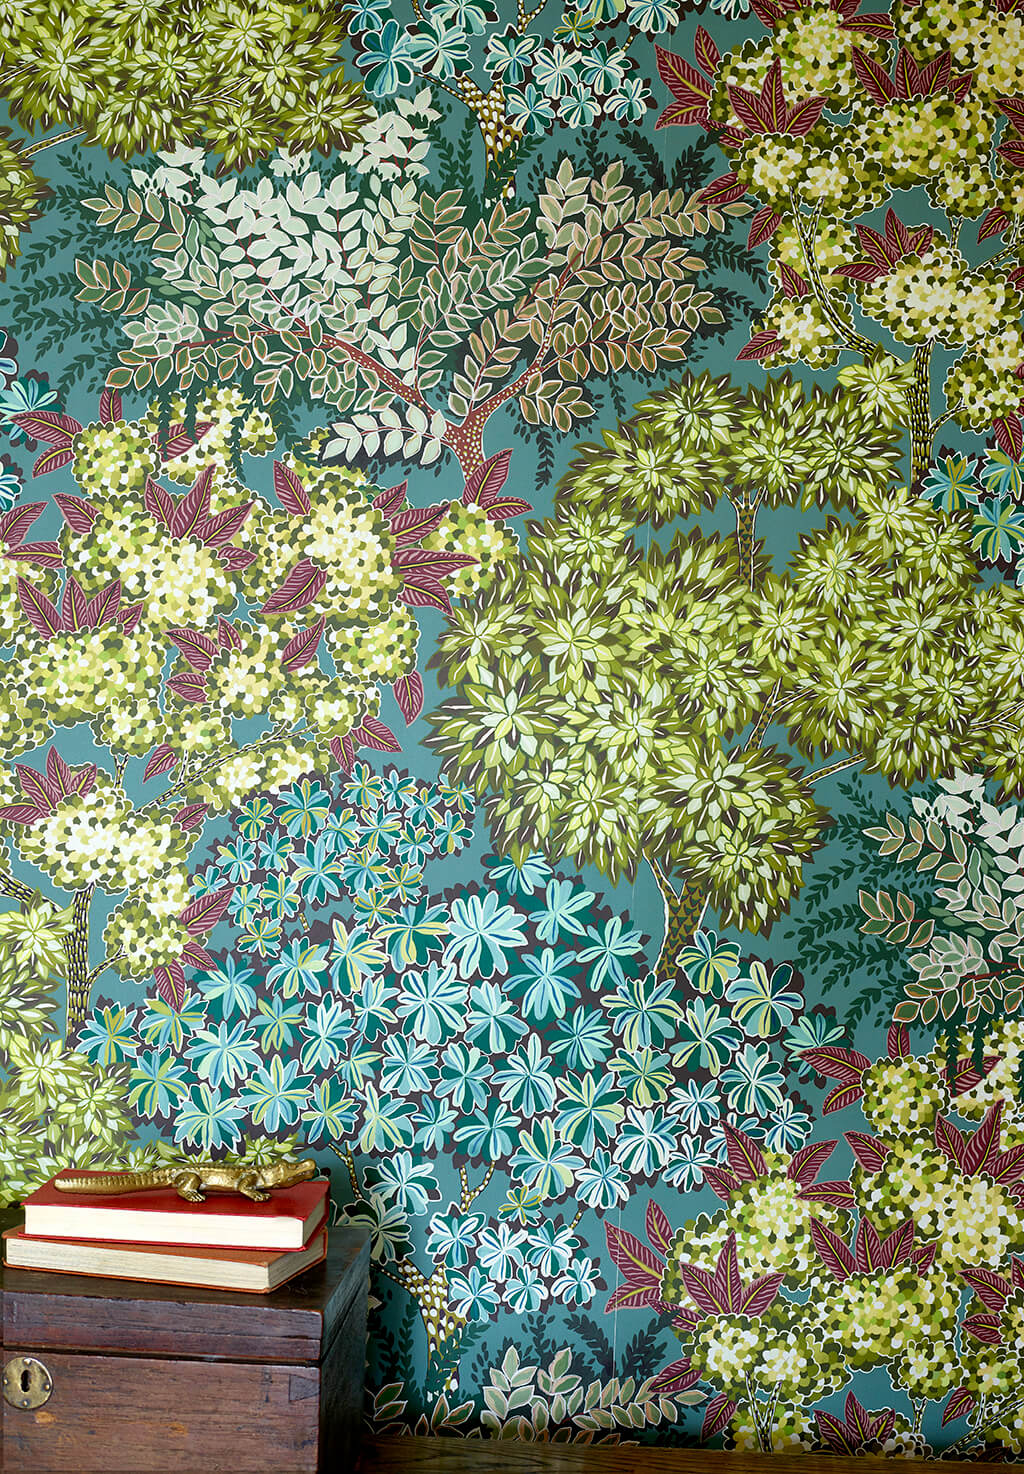 Broccoli Canopy Room Wallpaper | Celadon, Olive Green and Deep Red